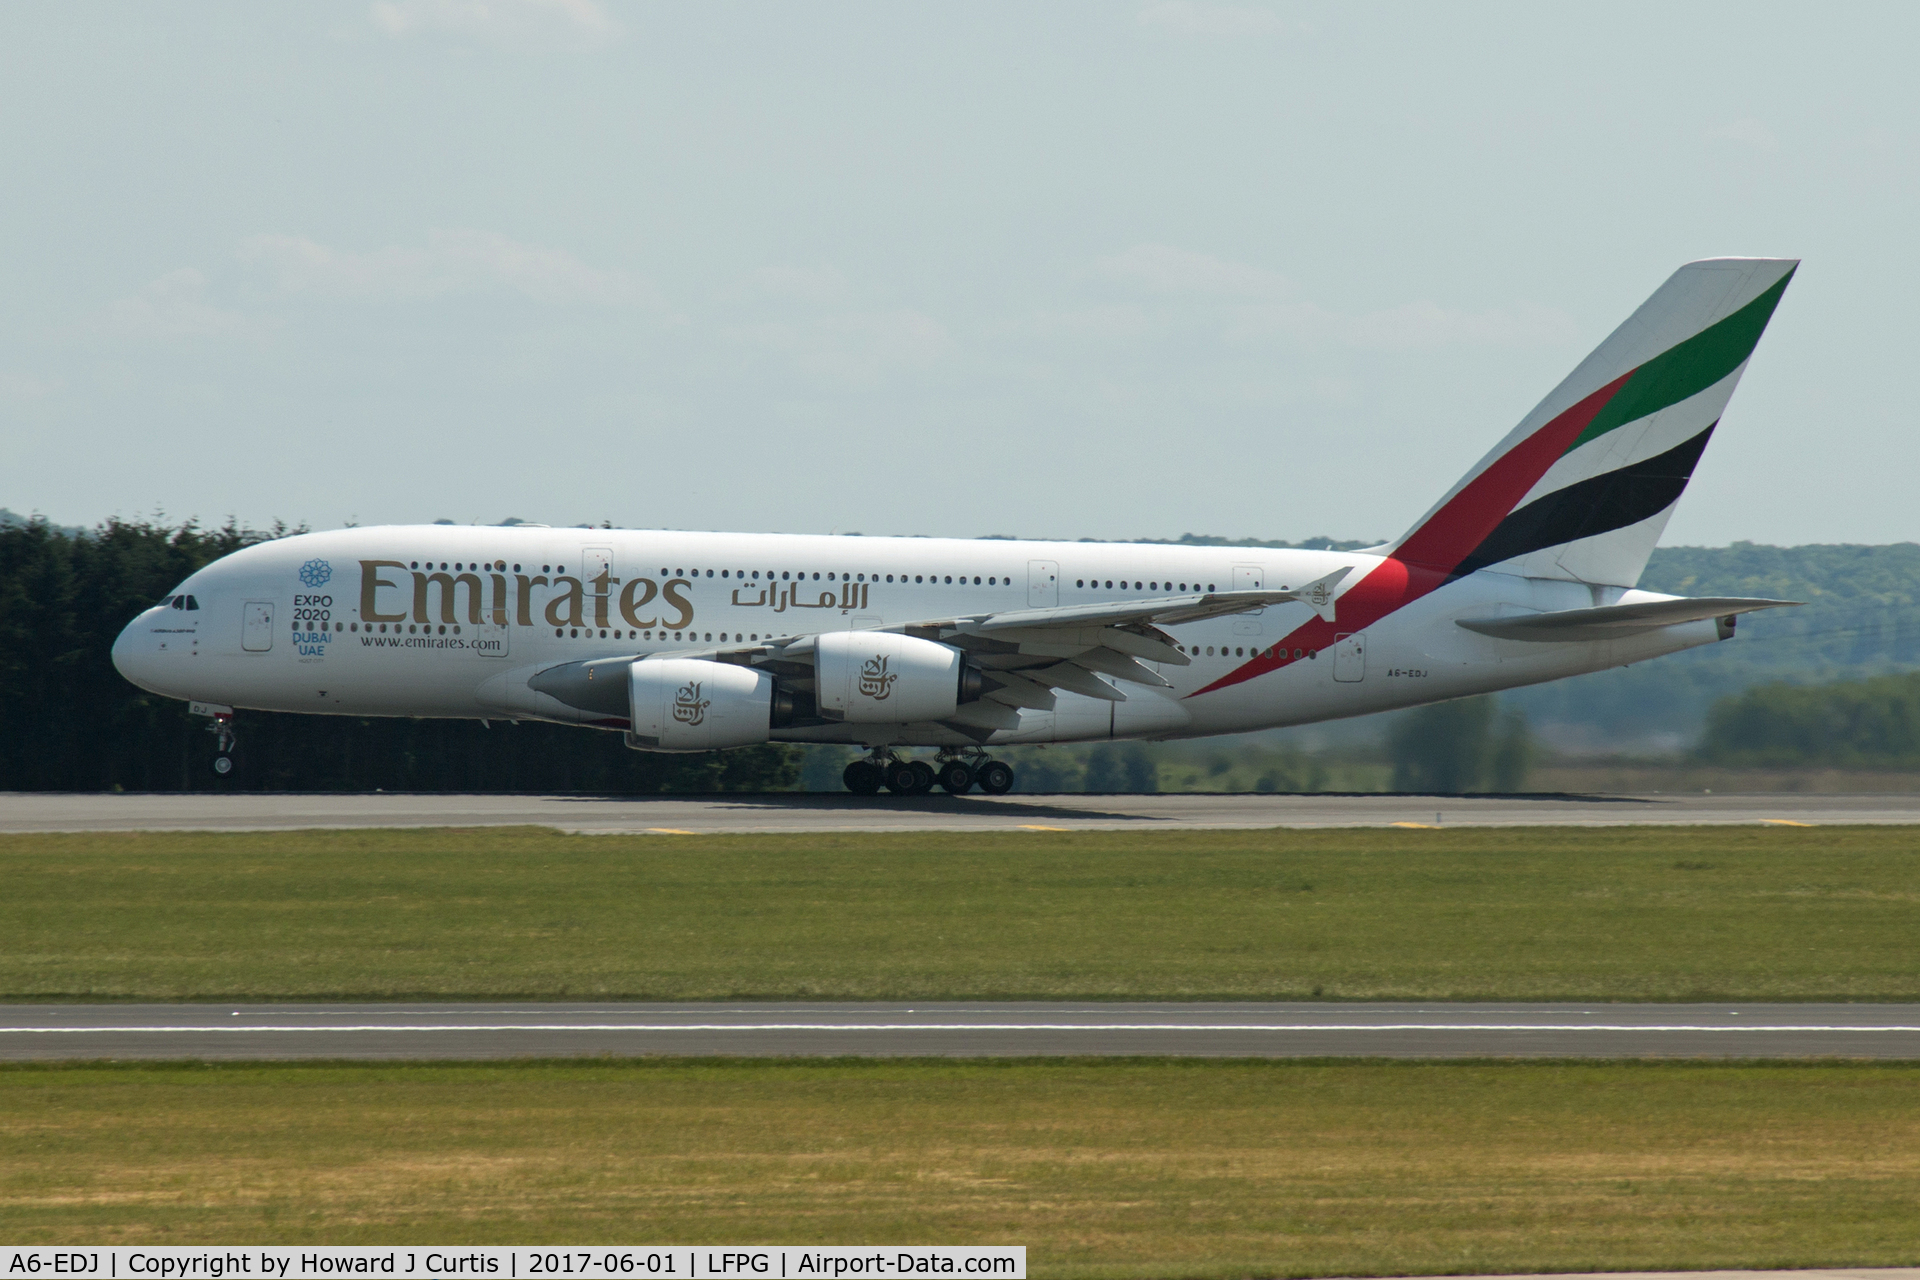 A6-EDJ, 2006 Airbus A380-861 C/N 009, On departure.